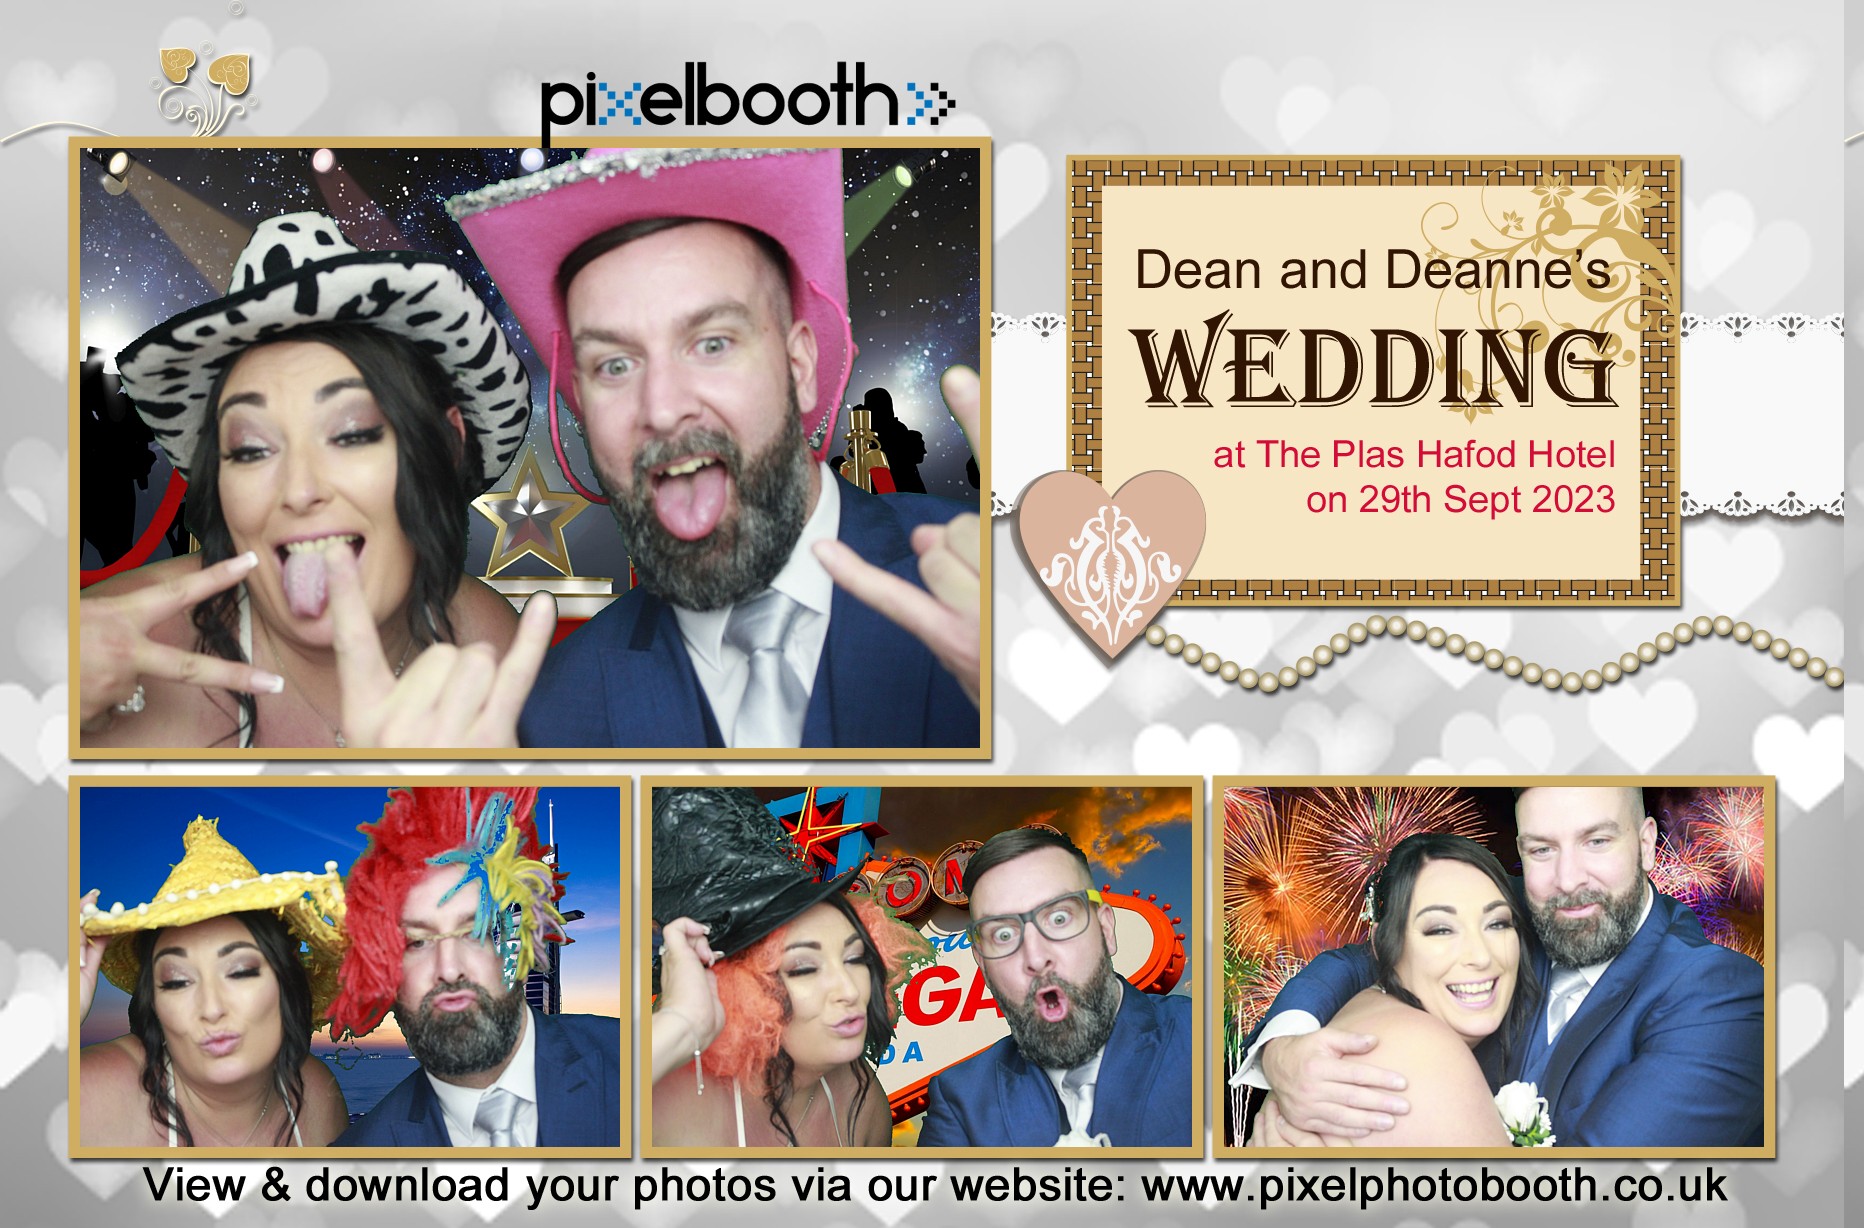 29th Sept 2023: Dean and Deanne's Wedding at The Plas Hafod